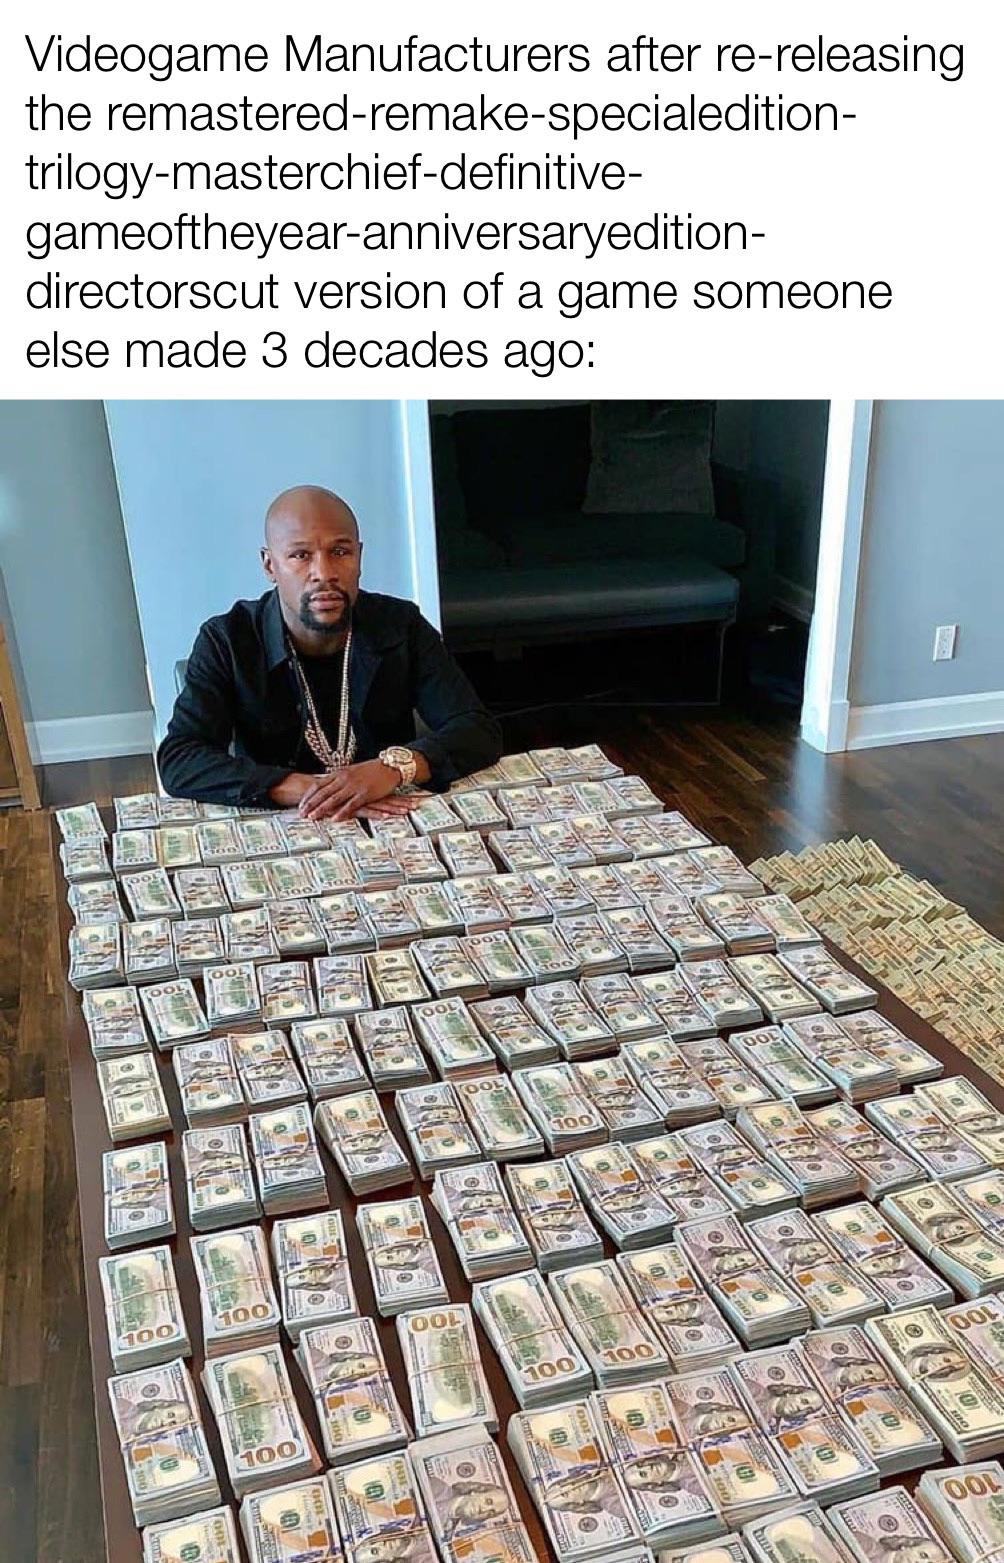 monday morning randomness - floyd mayweather watch collection - Videogame Manufacturers after rereleasing the remasteredremakespecialedition trilogymasterchiefdefinitive gameoftheyearanniversaryedition directorscut version of a game someone else made 3 de